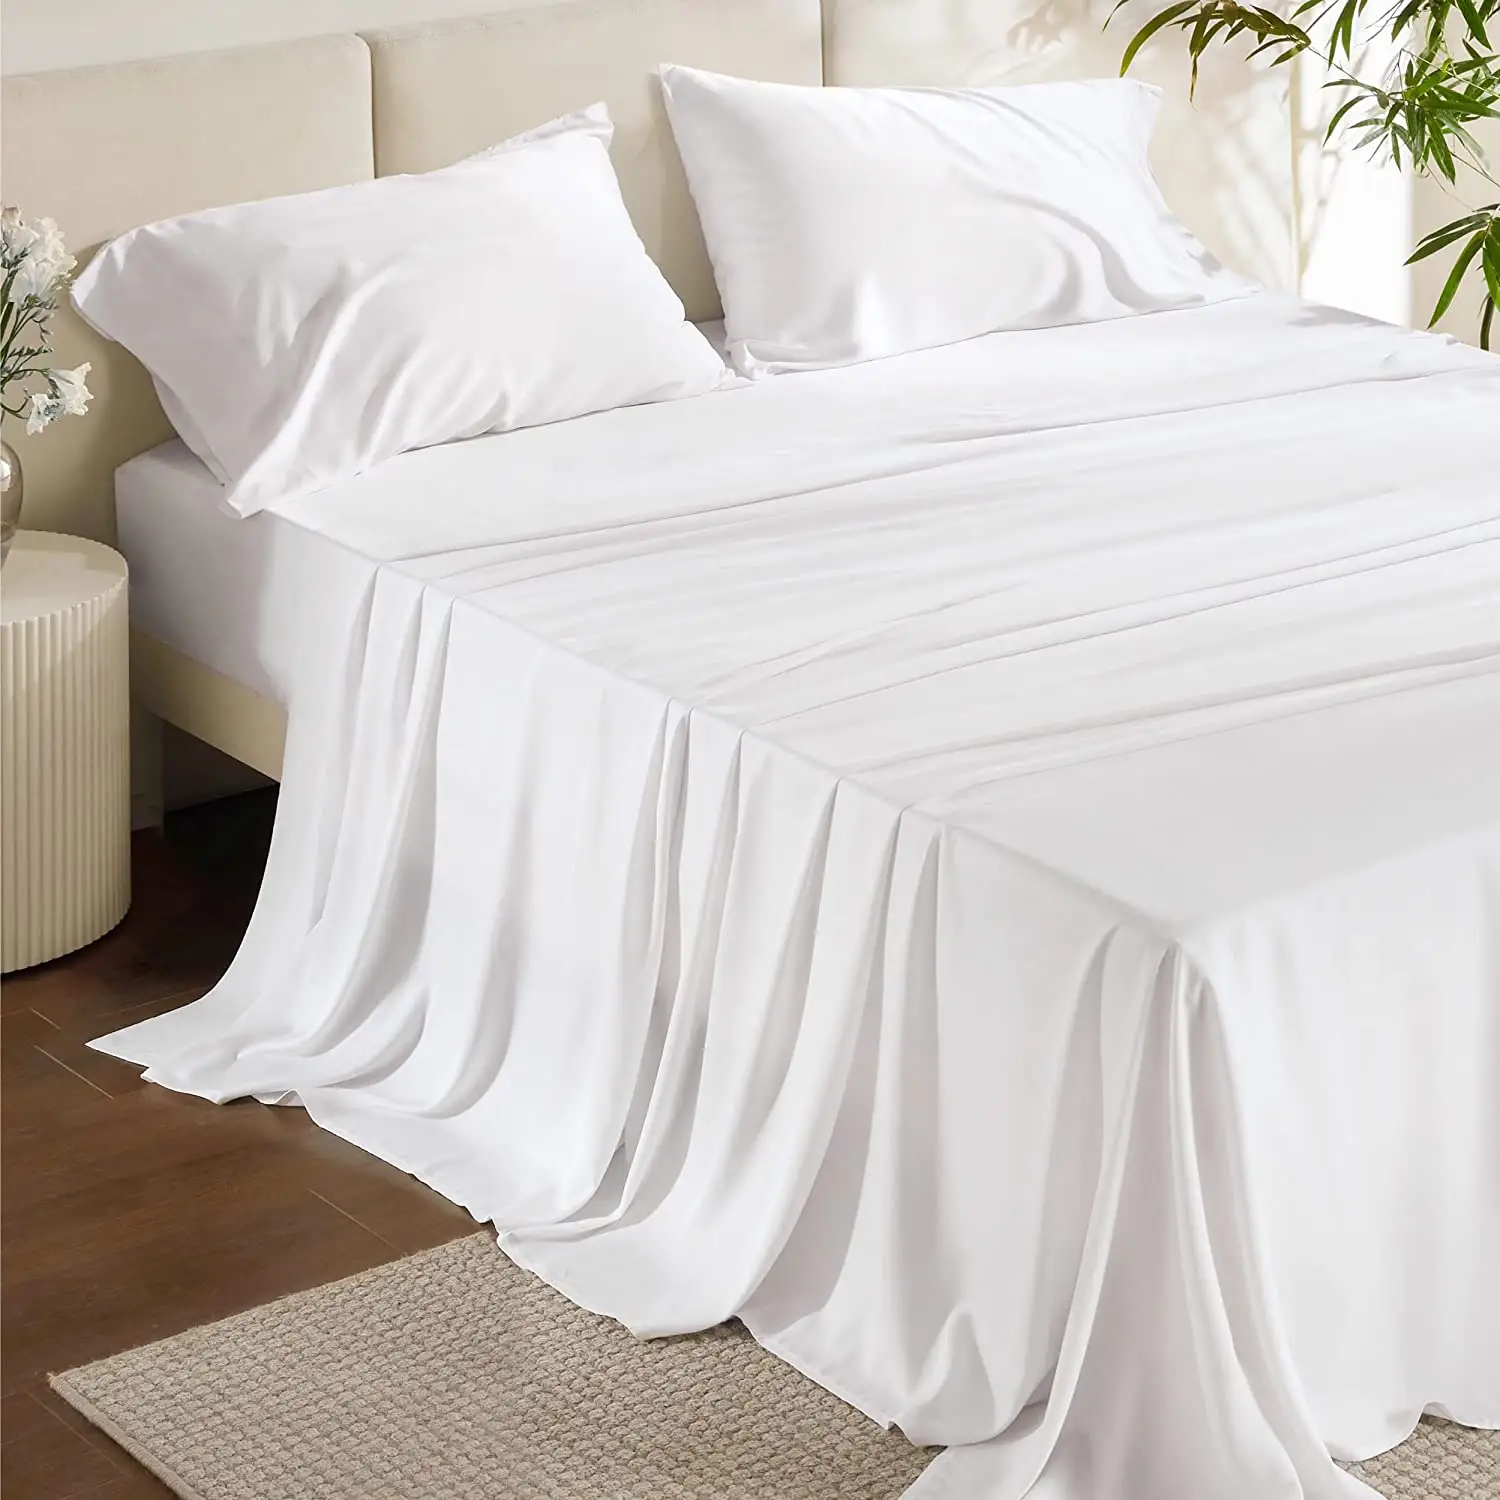 Luxury Bamboo Sheets - Blend of Rayon Derived from Bamboo - Cooling & Breathable, Silky Soft 4 Piece Bedding Set